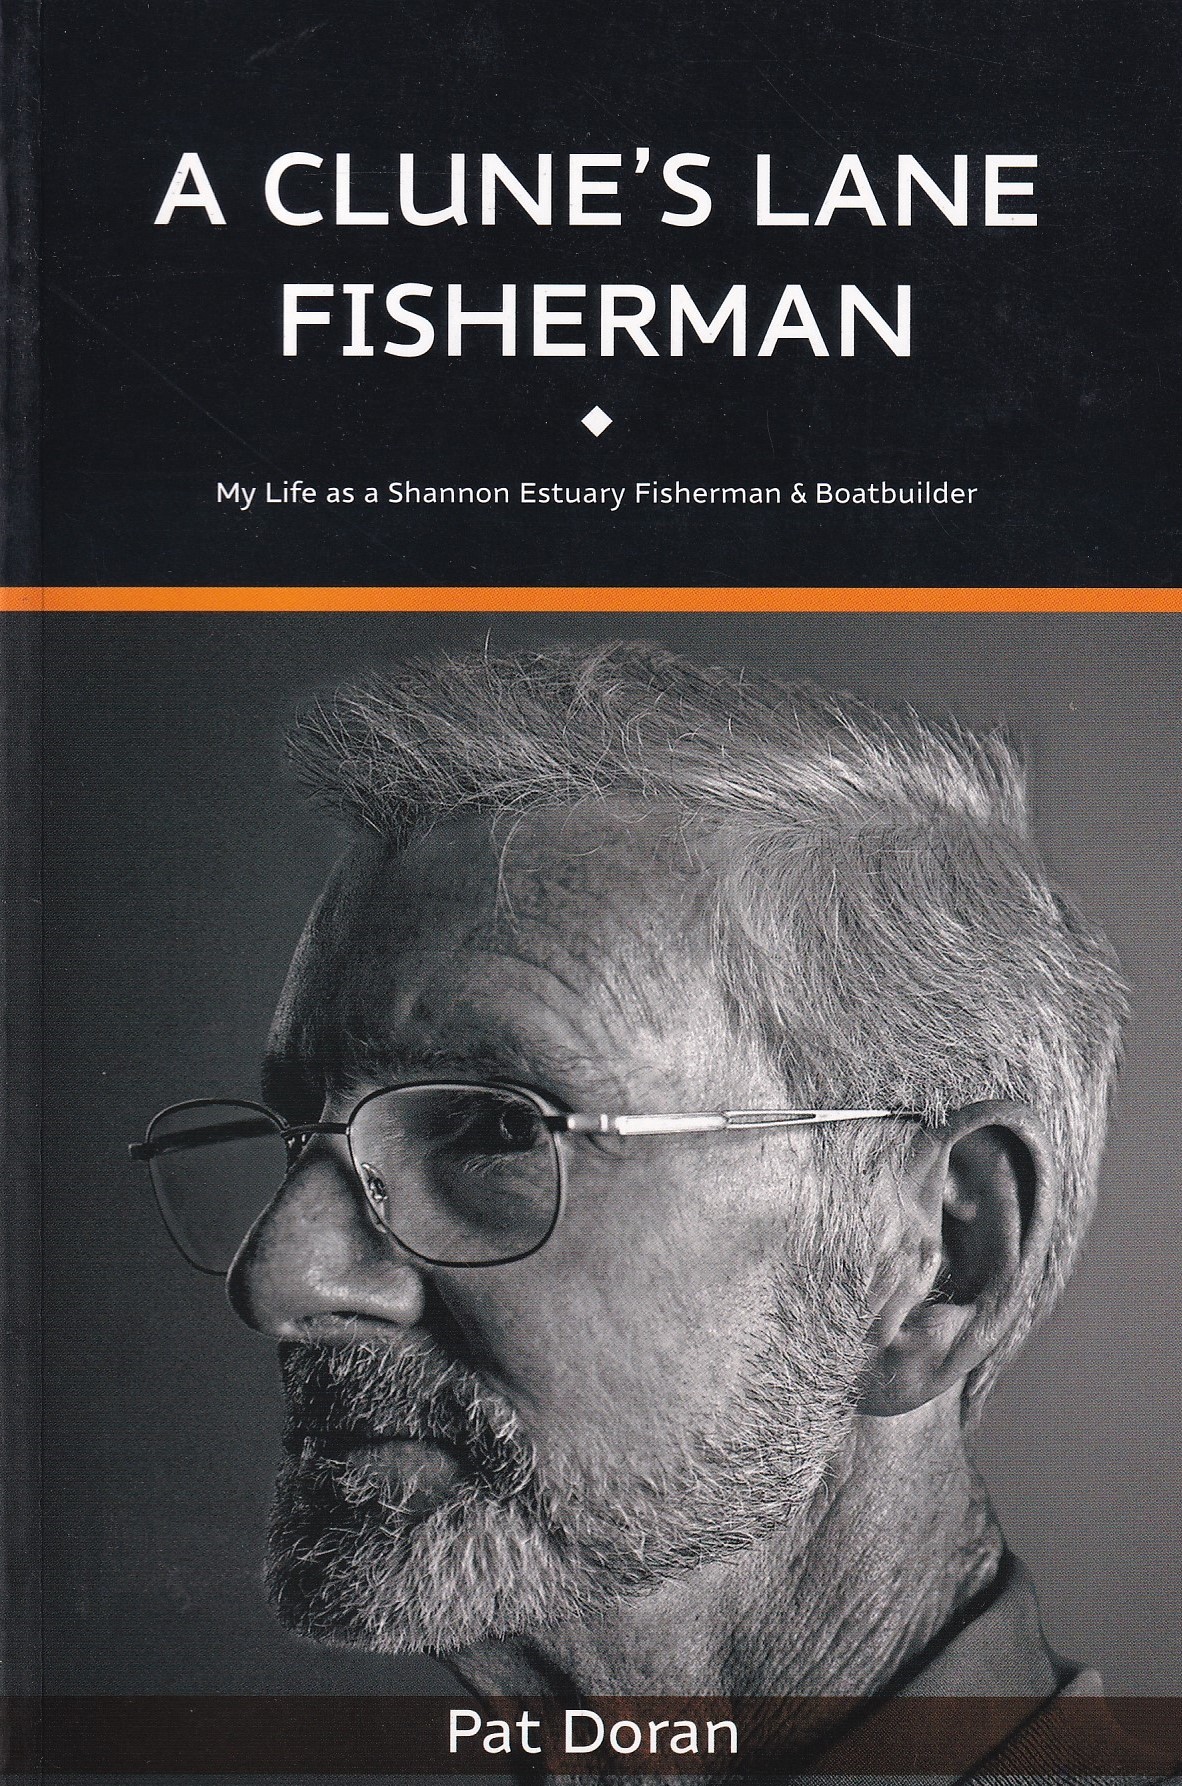 A Clune’s Lane Fisherman: My Life as a Shannon Estuary Fisherman and Boatbuilder | Doran, Pat | Charlie Byrne's